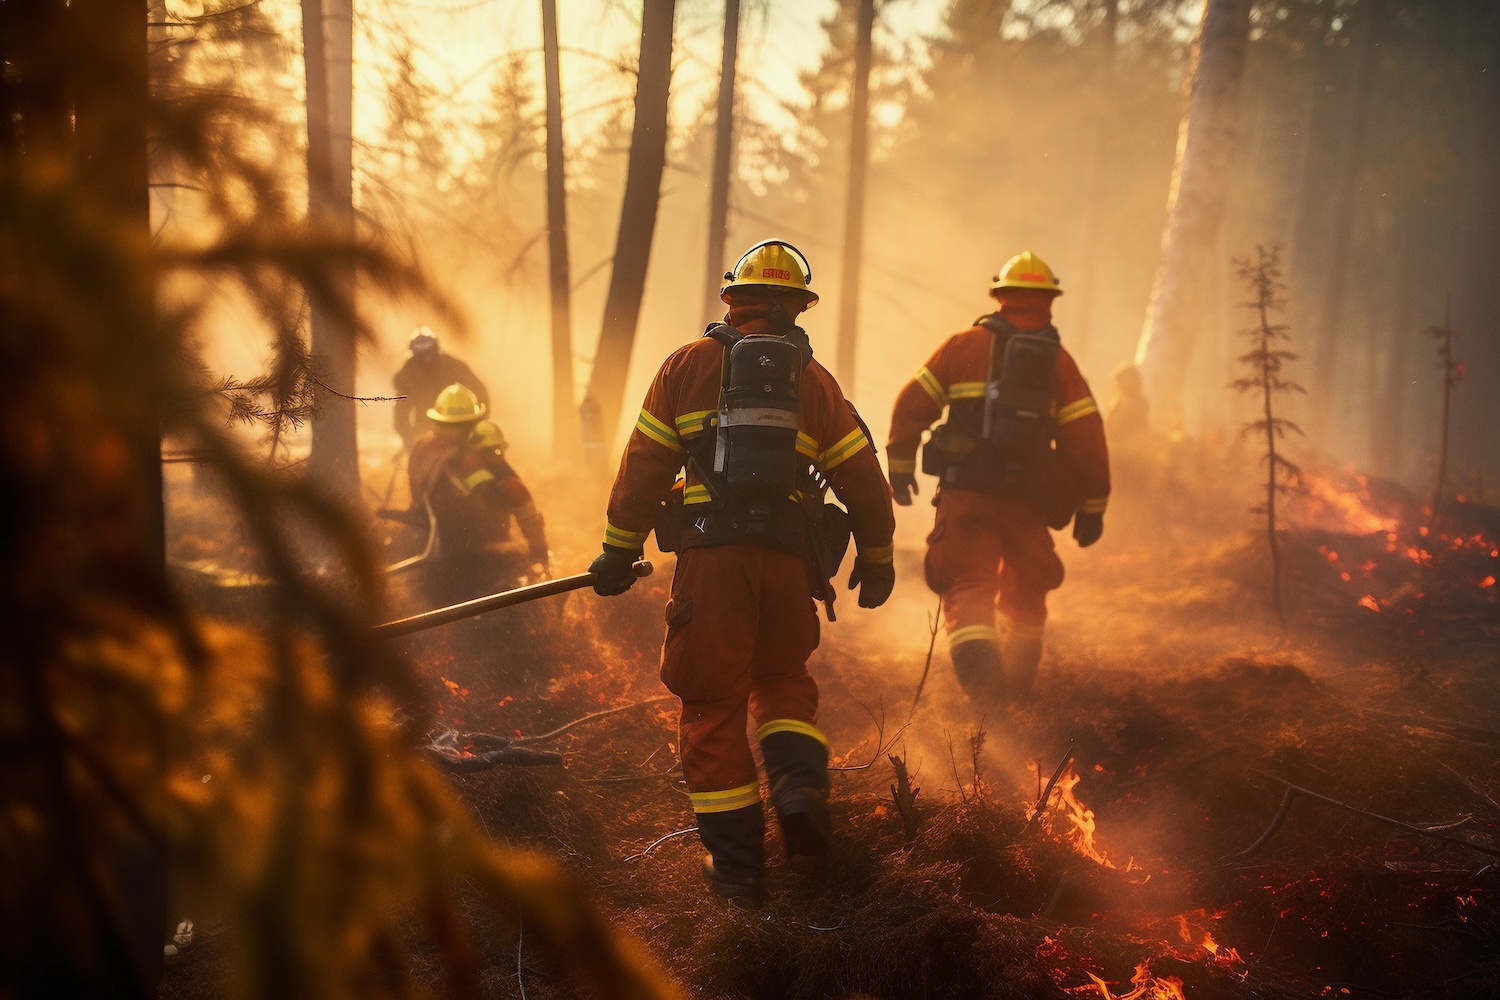 Four firefighters dressed in flame-retardant suits and walking through a burning forest